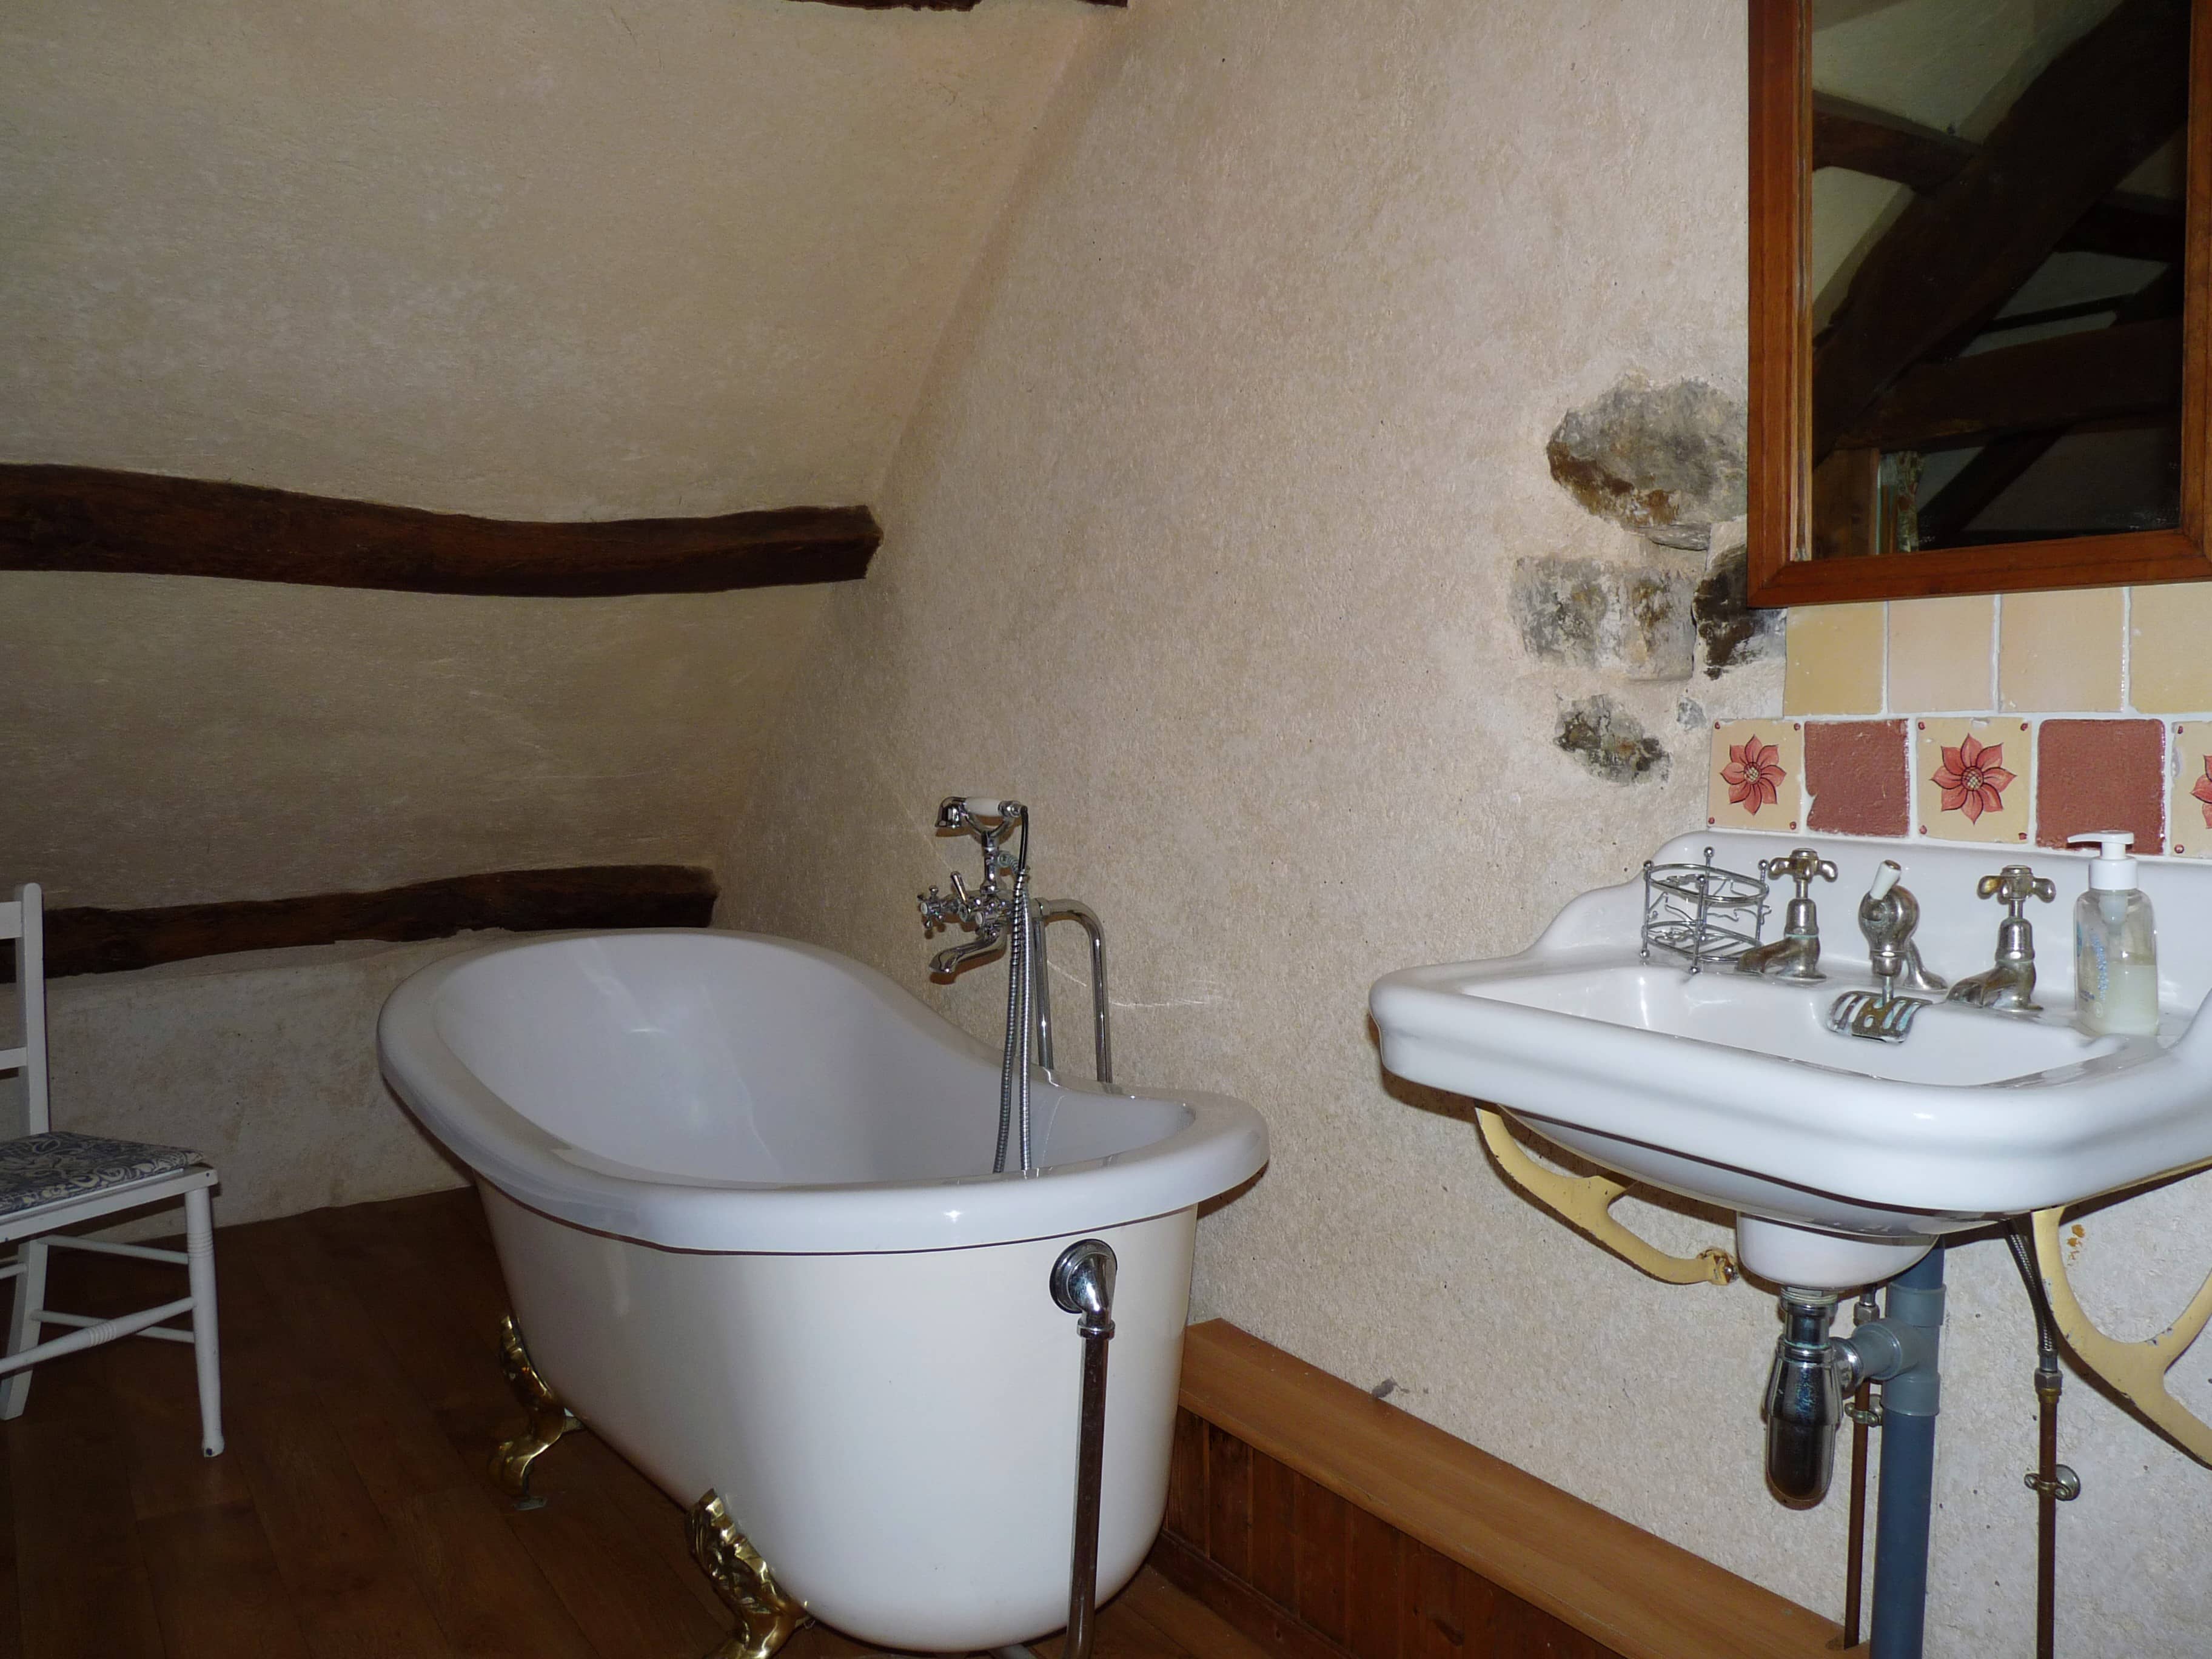 Modern and elegant bathroom of La Julerie cottage in Brittany, France, with a walk-in shower, mosaic tiles, and high-end amenities. Ideal for freshening up after a day of sightseeing in Brittany.